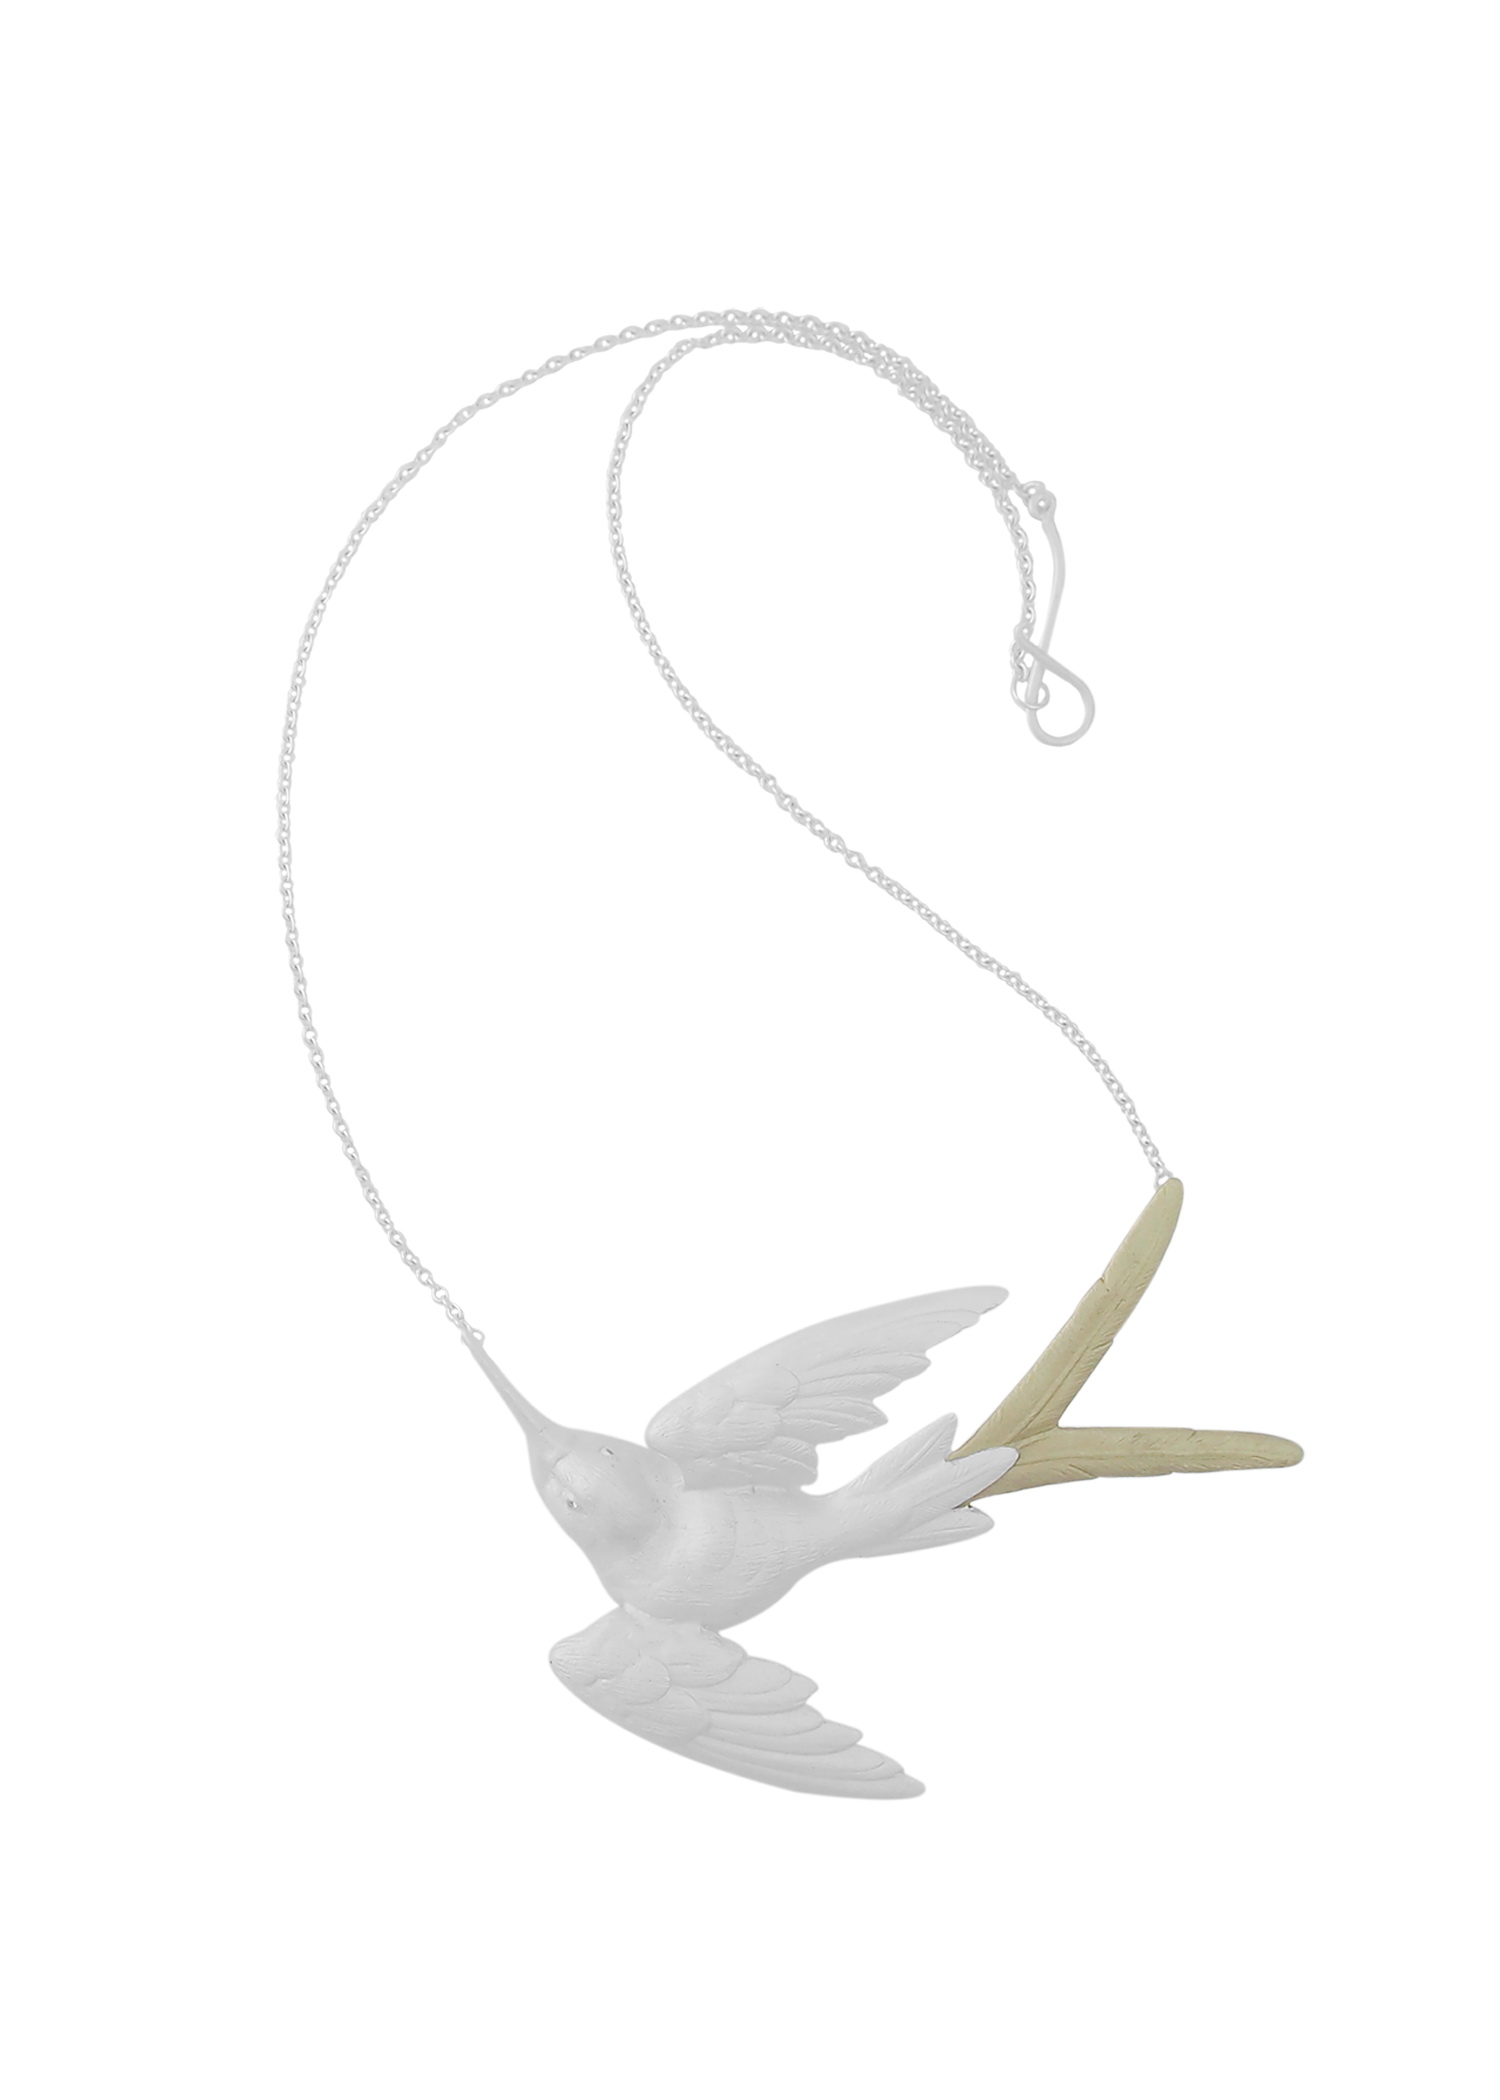 Fluttering Svallow Necklace, silver